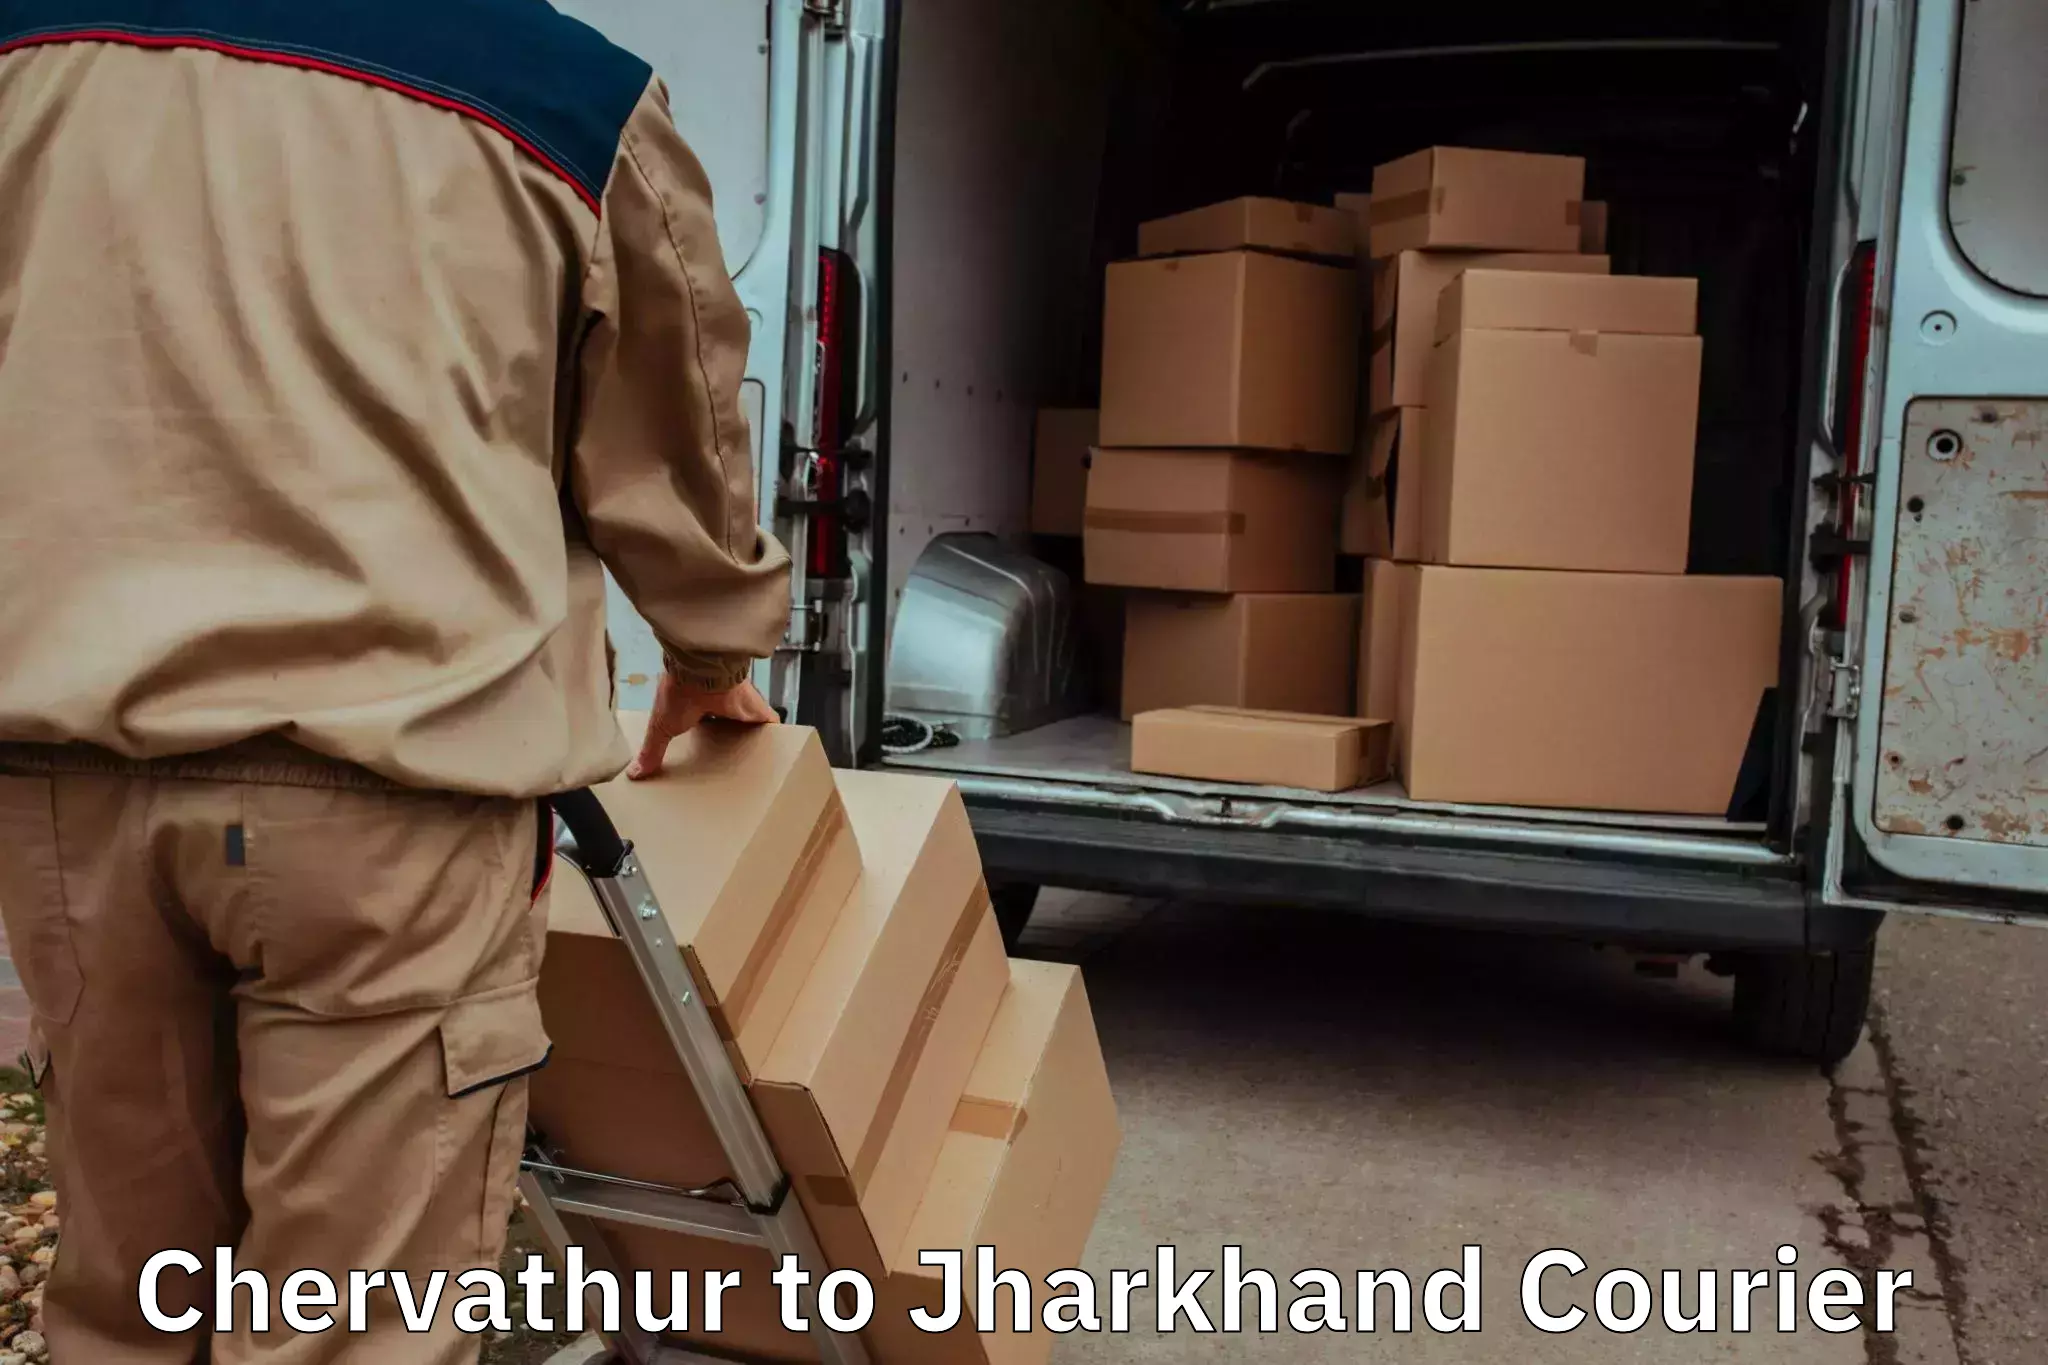 Trusted moving company in Chervathur to Dhalbhumgarh